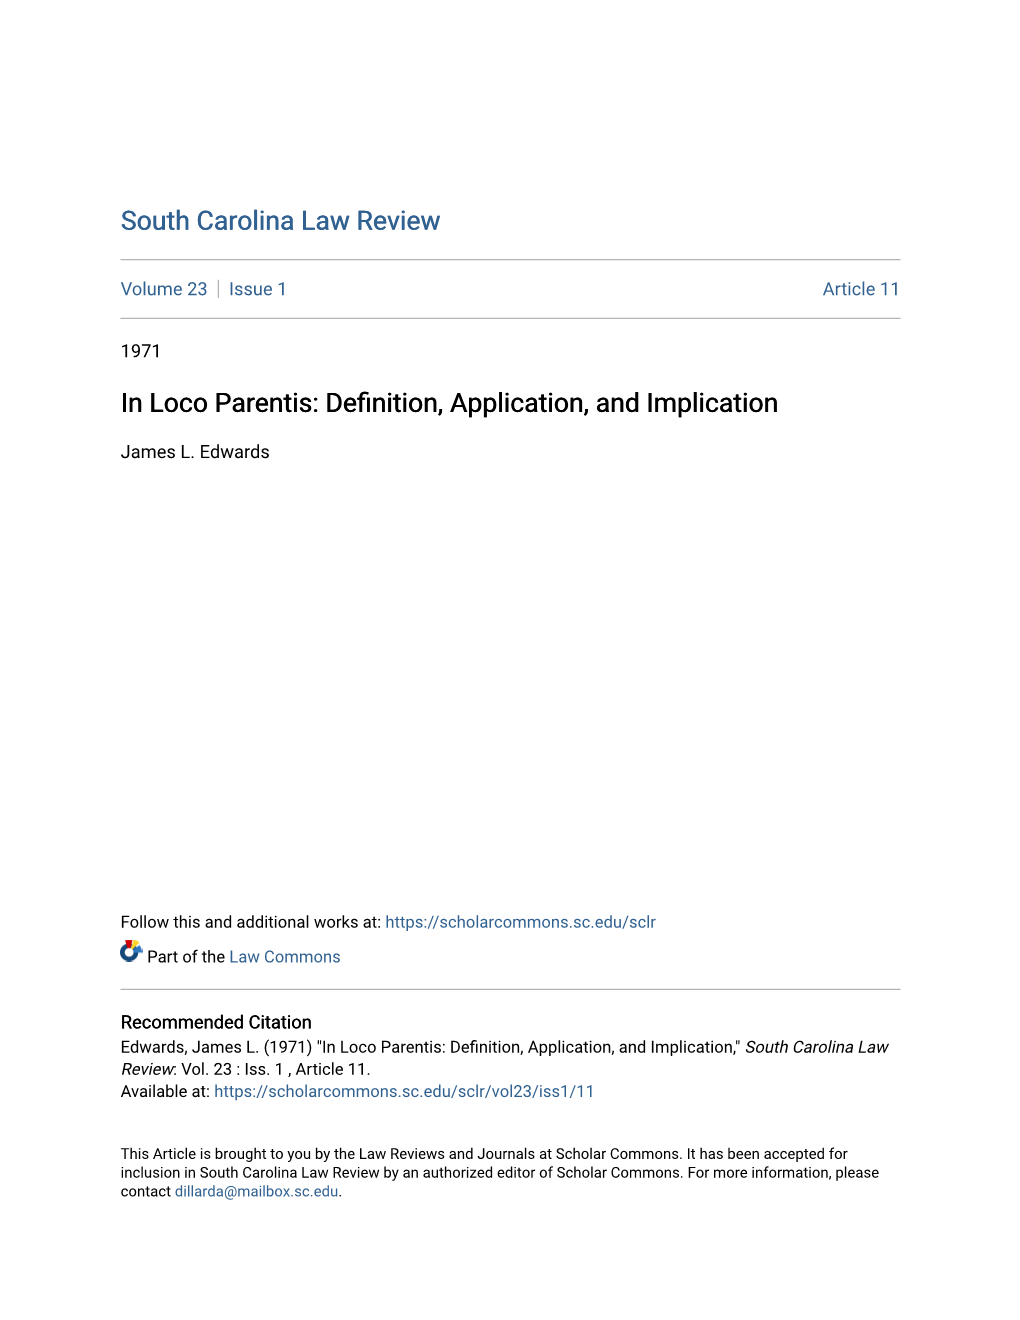 In Loco Parentis: Definition, Application, and Implication